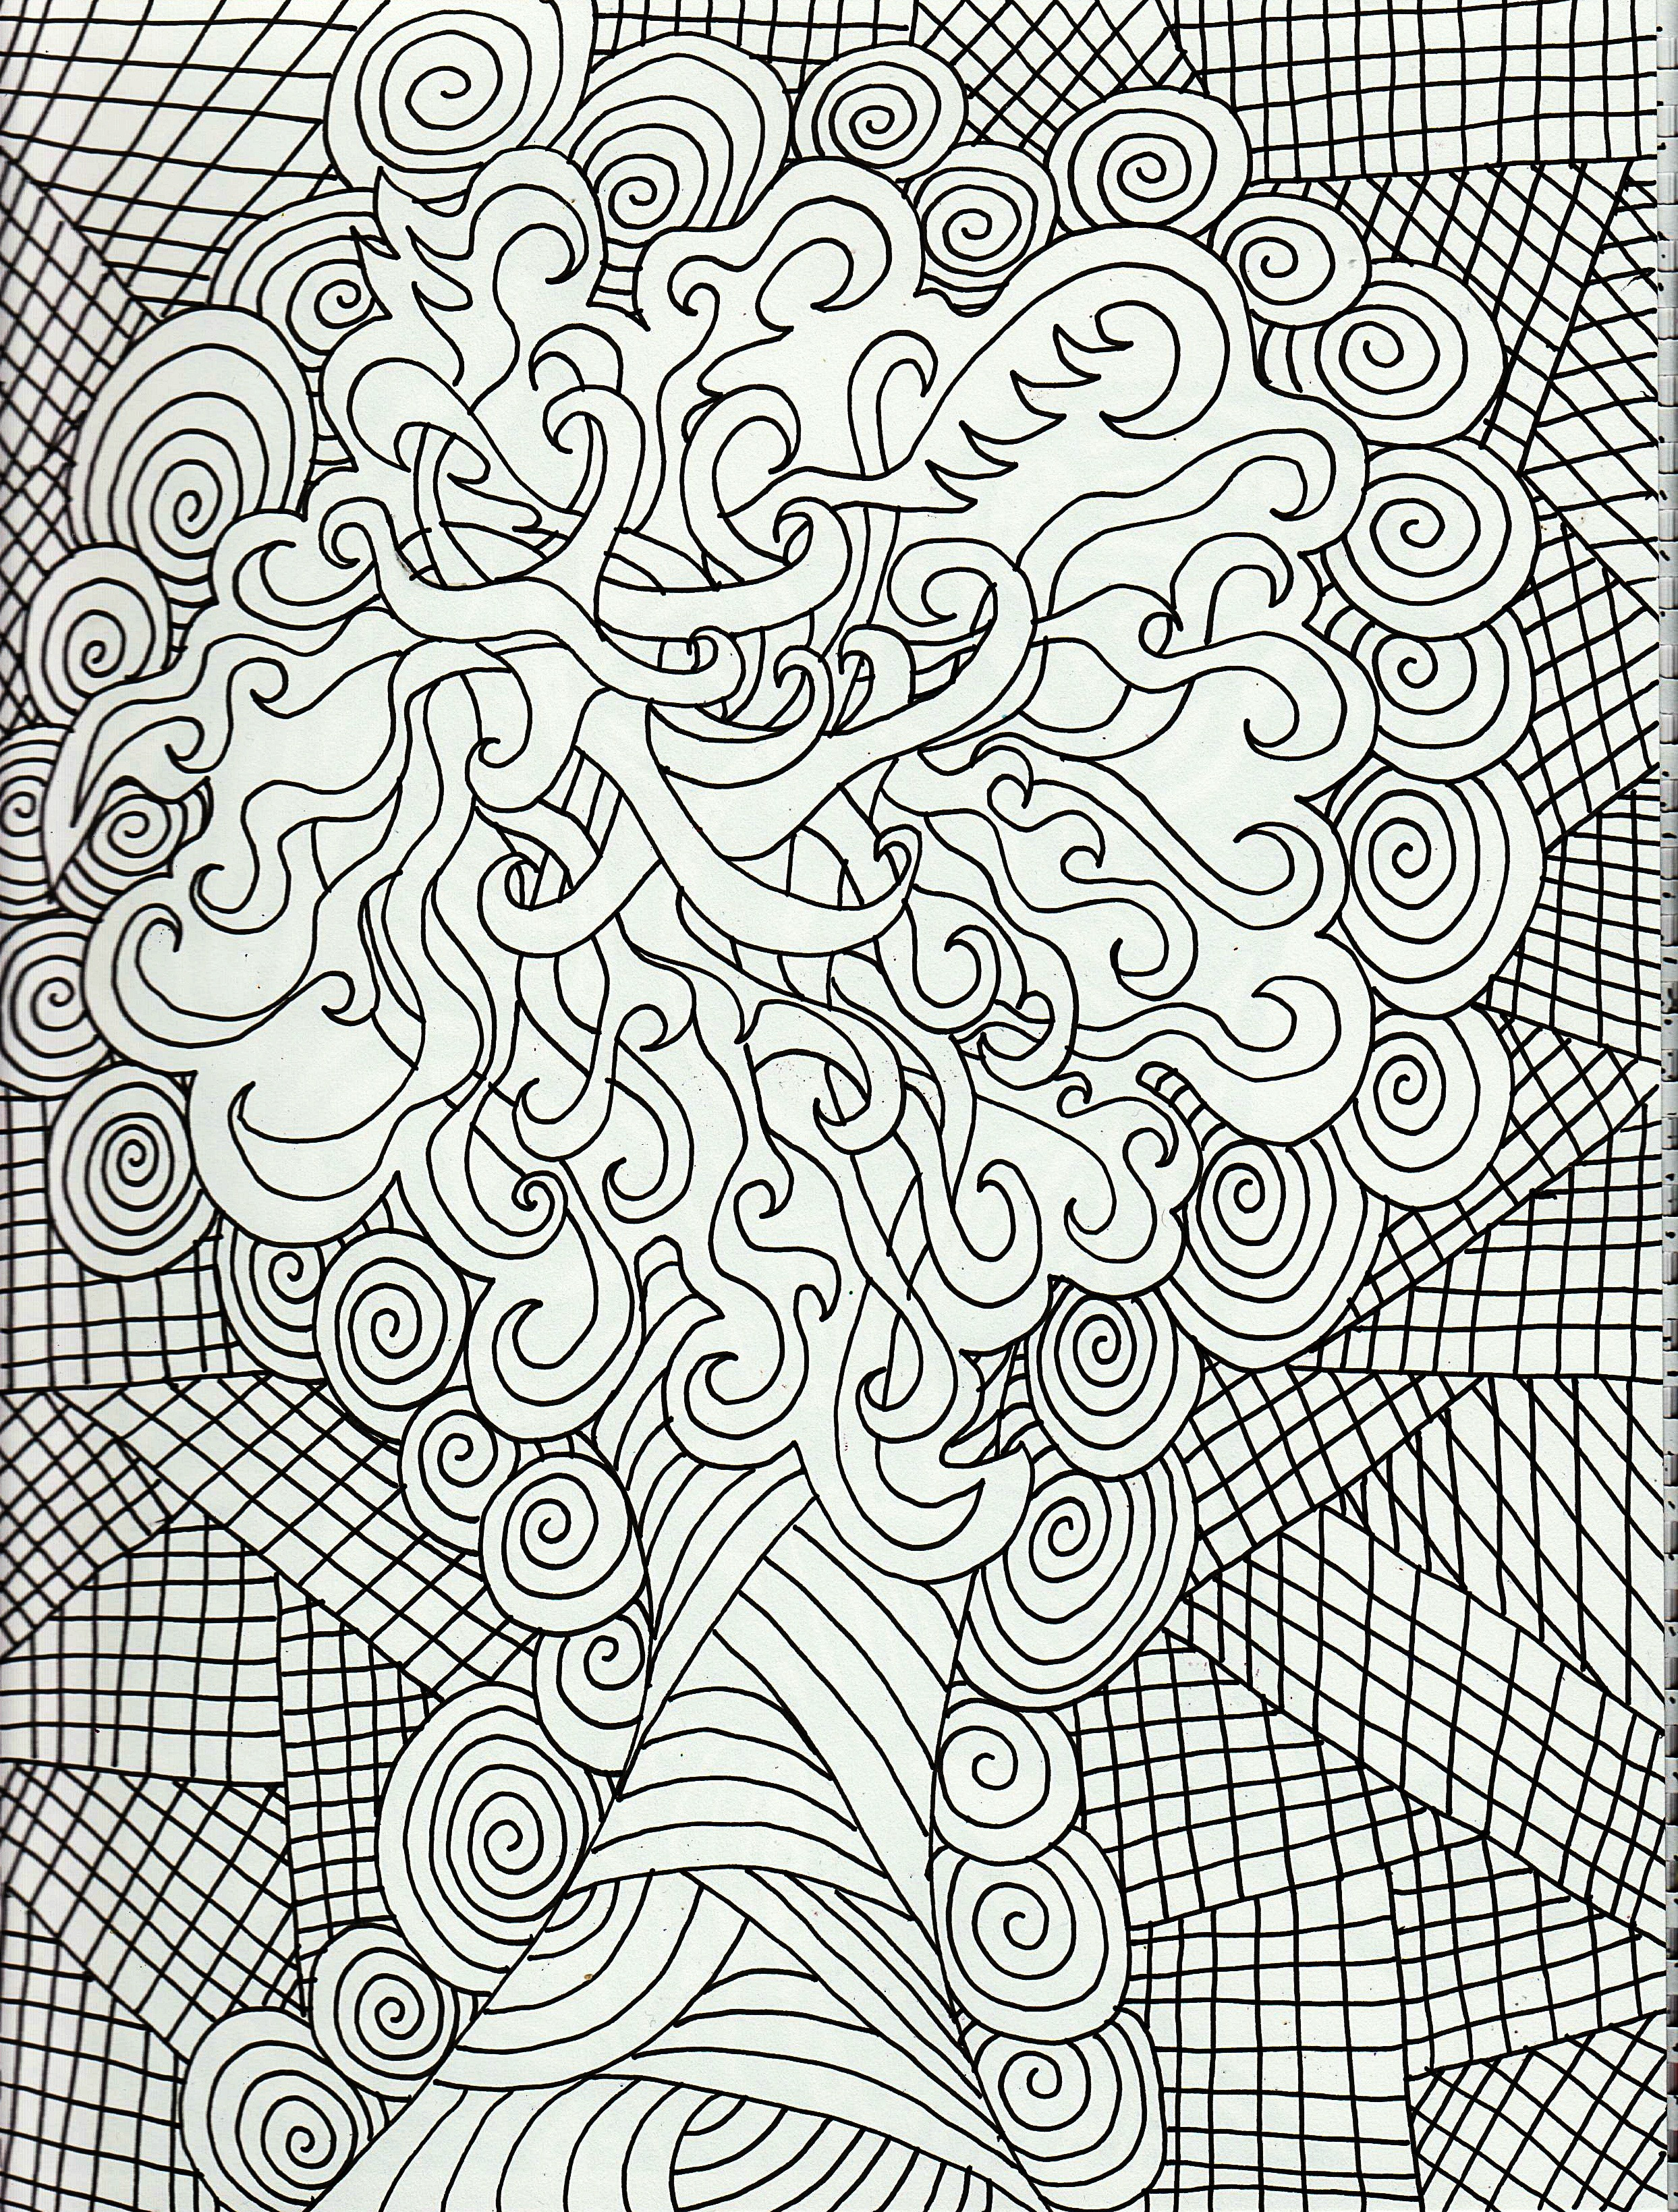 Coloring Pages For Girls Abstract Art
 Free Coloring Pages Adults Art And Abstract Category Image